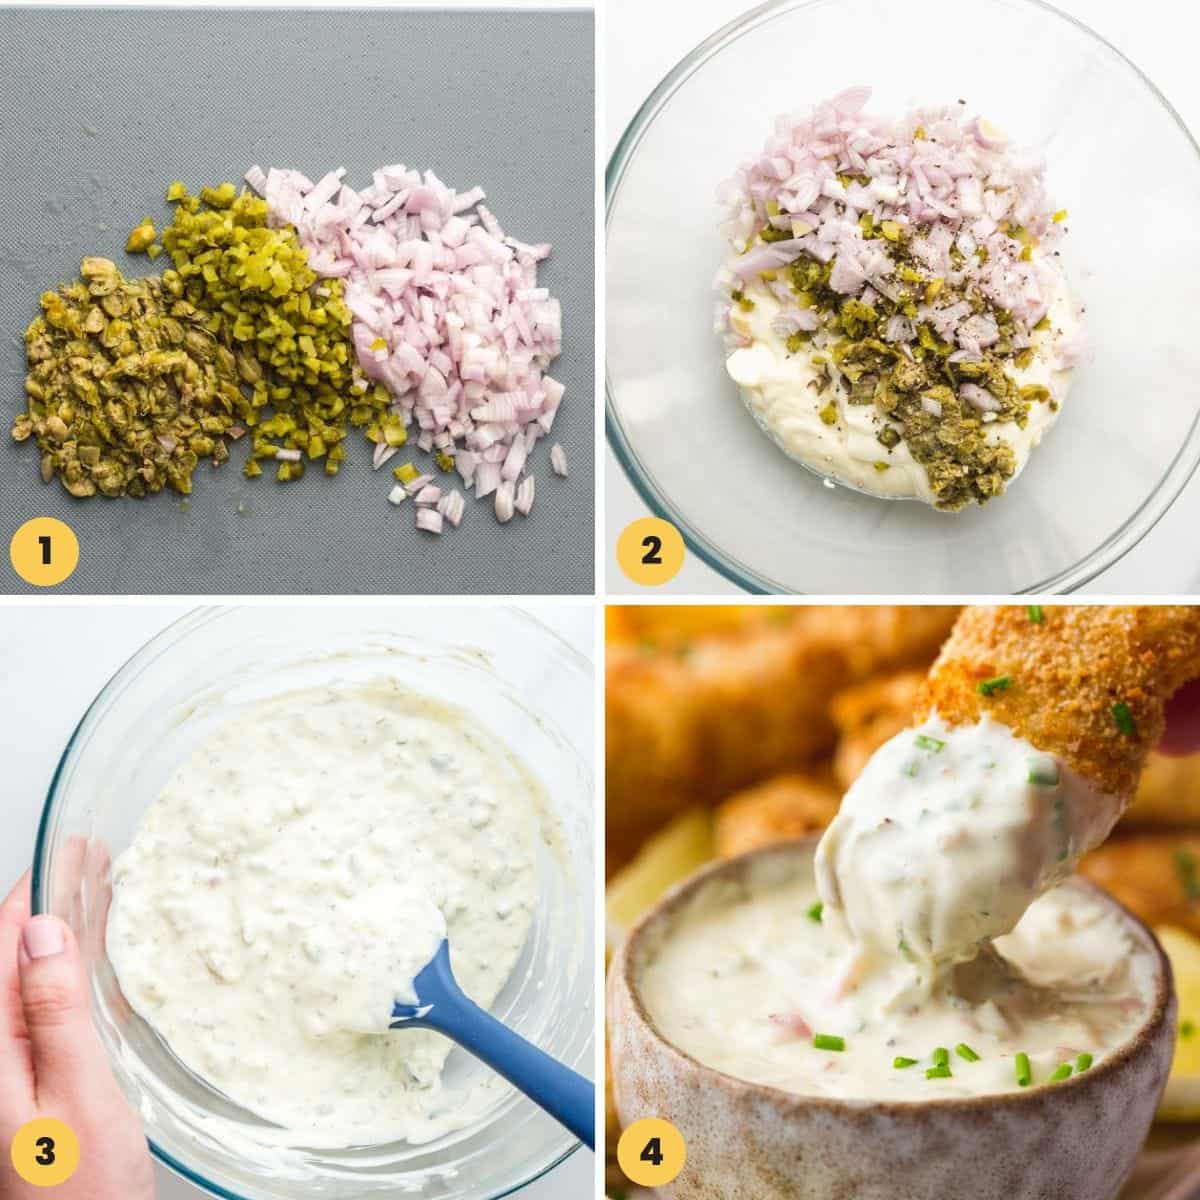 Collage of four images showing how to prep ingredients and mix up a tartar sauce